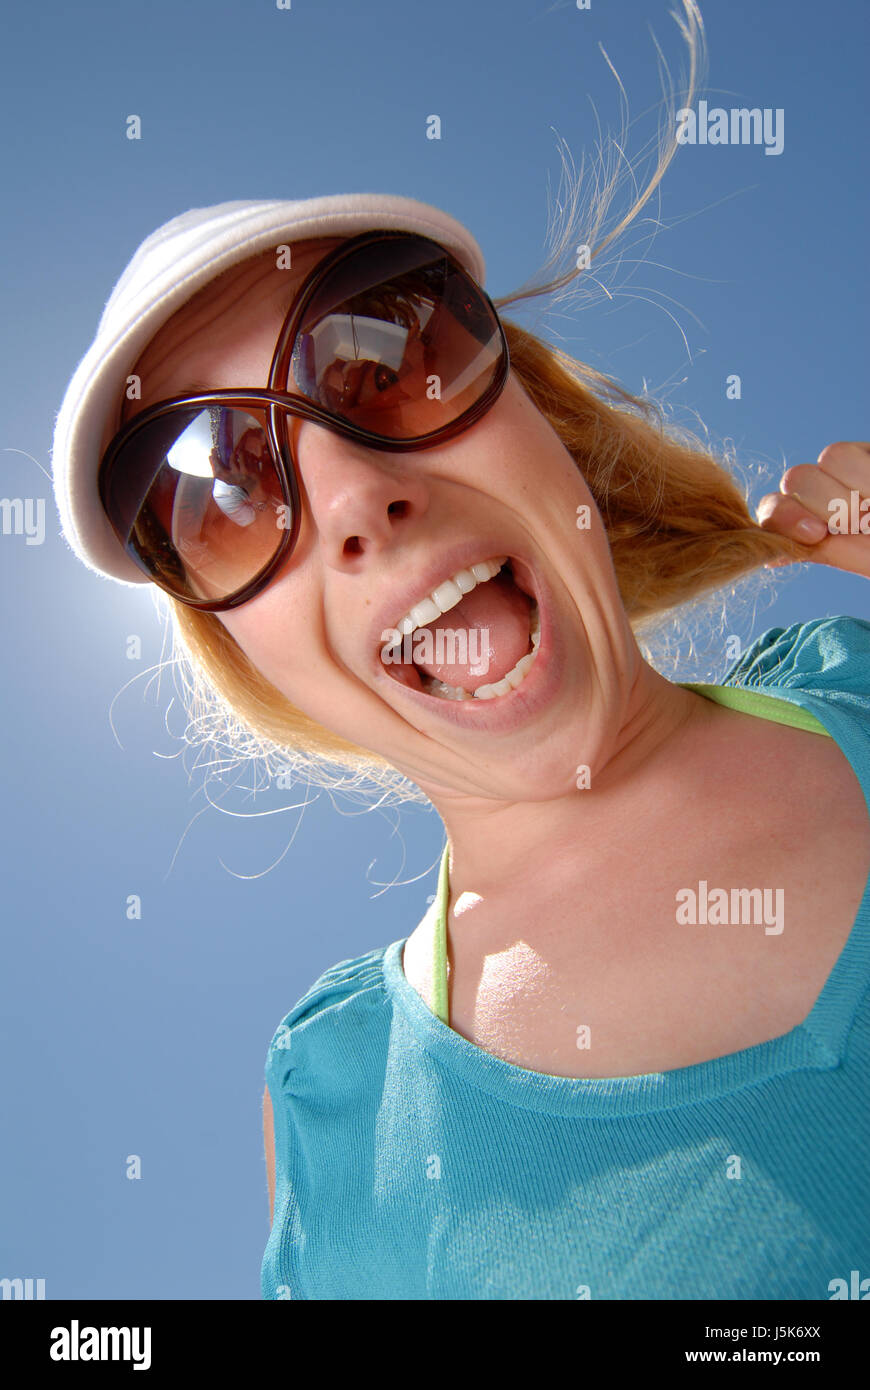 woman laugh laughs laughing twit giggle smile smiling laughter laughingly Stock Photo